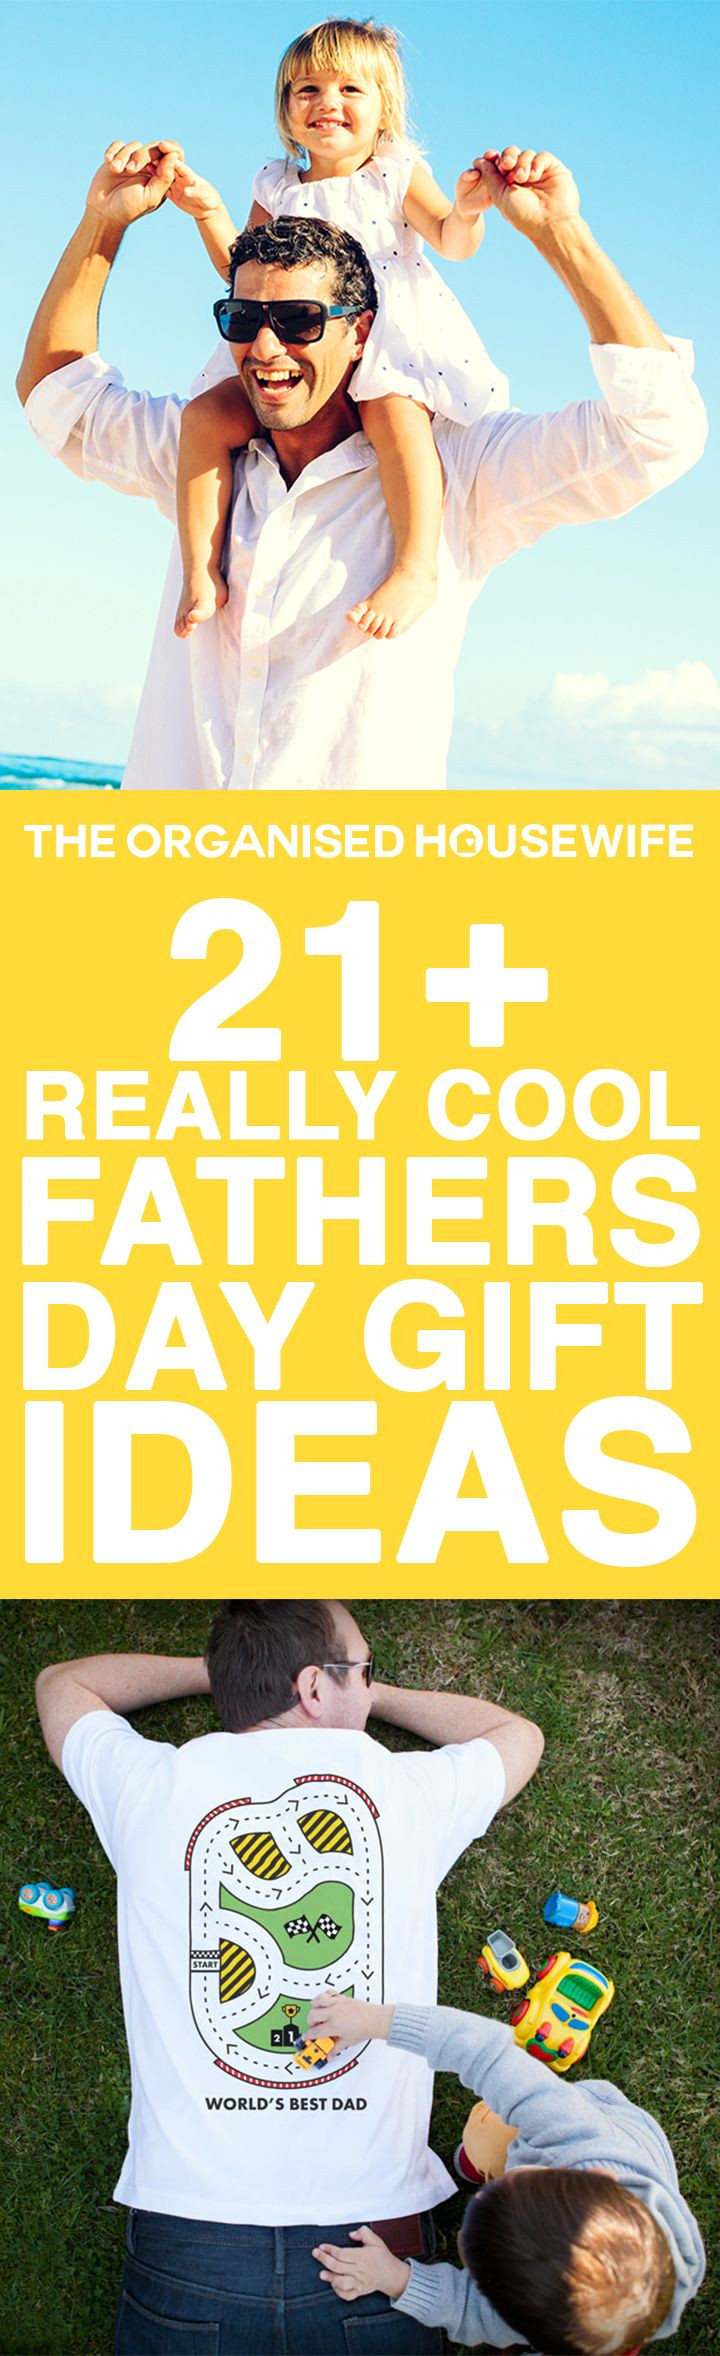 Cool Fathers Day Gift Ideas
 17 Best ideas about Cool Fathers Day Gifts on Pinterest